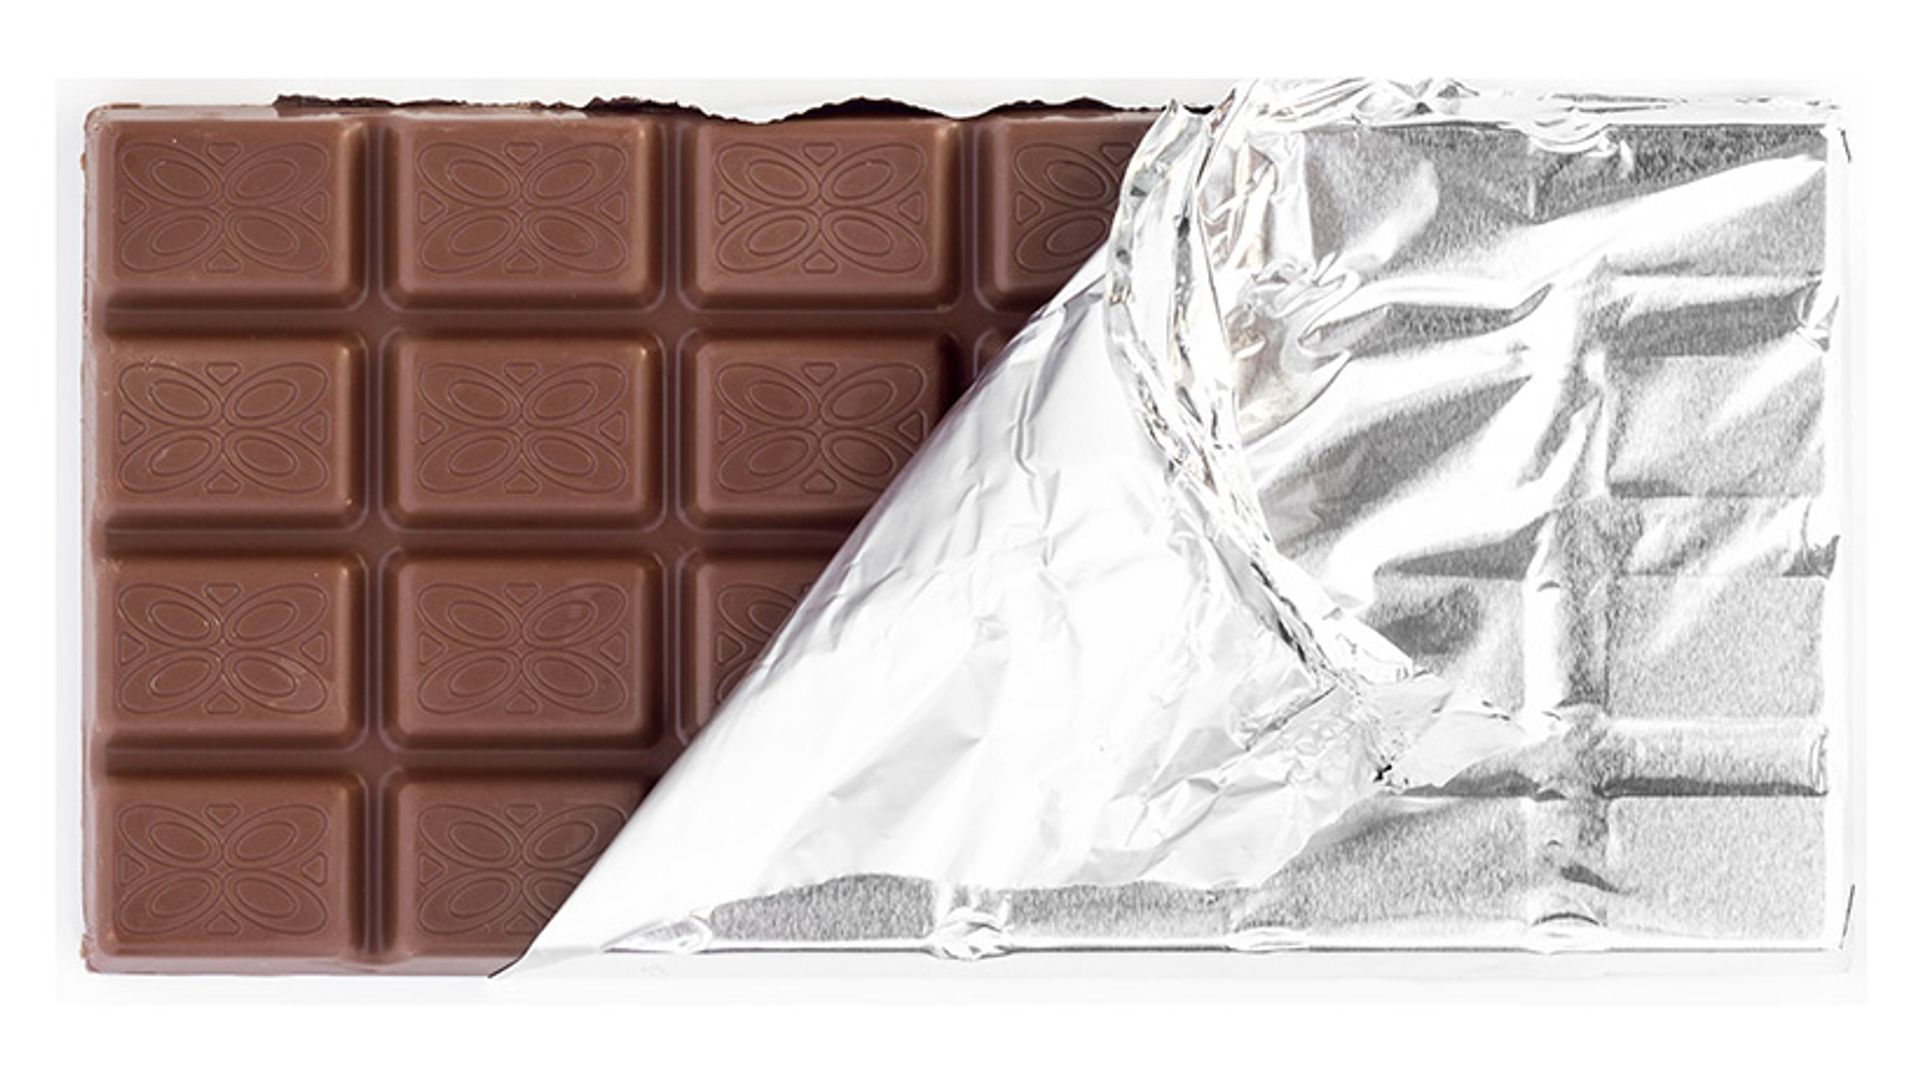 Calling all Willy Wonkas: you can now INVENT your own chocolate bar